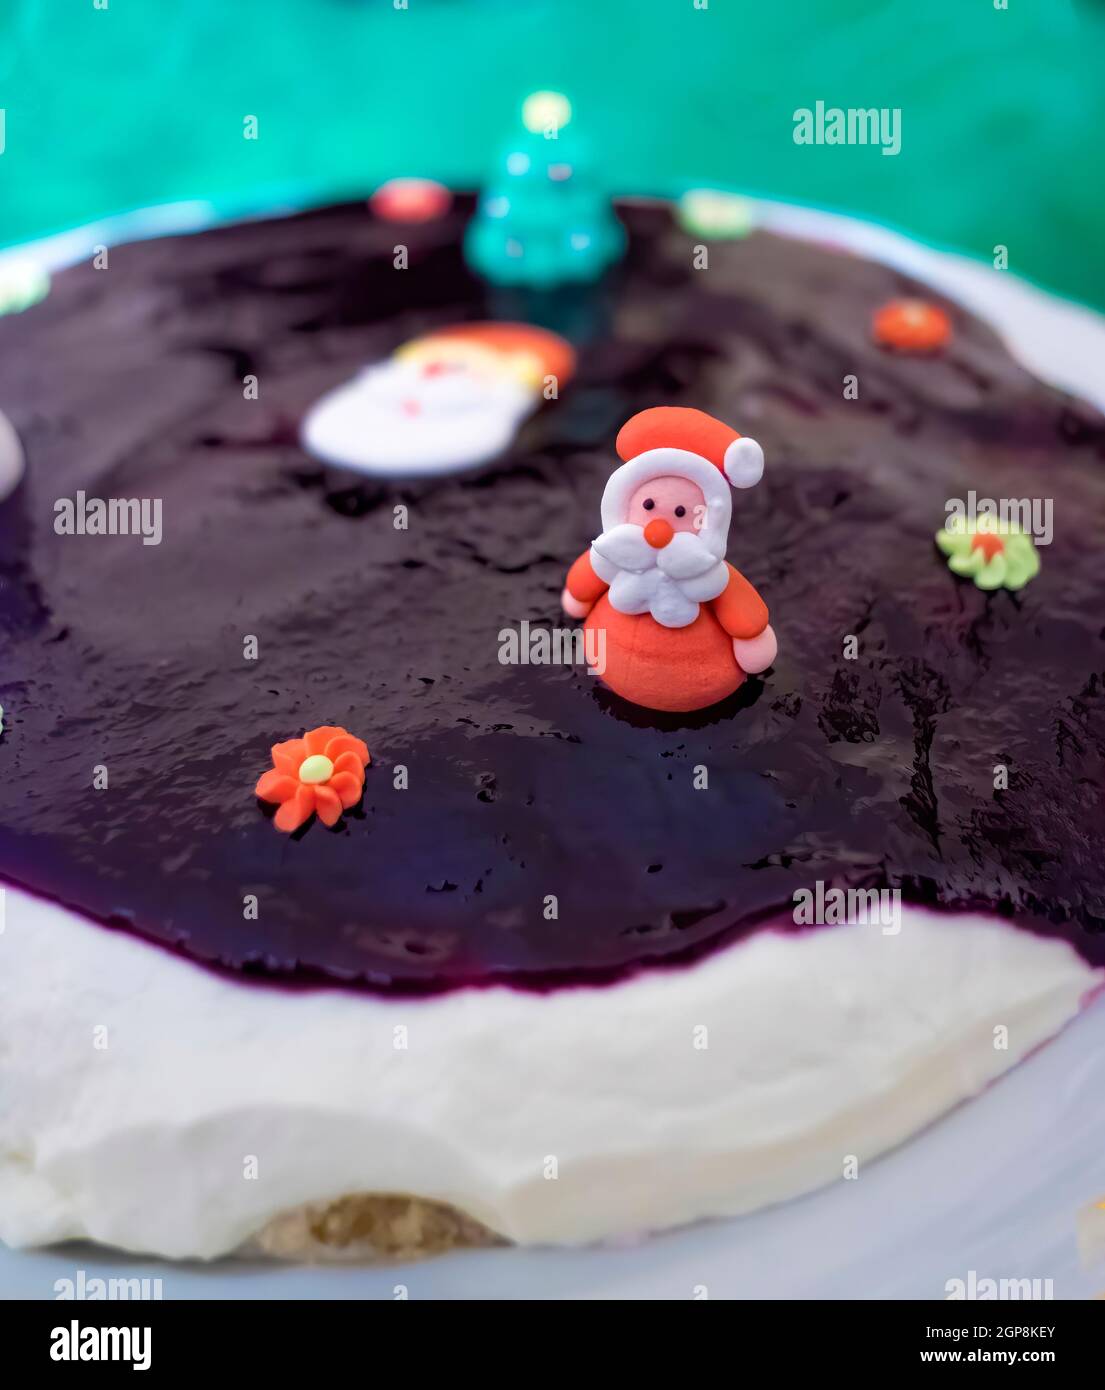 homemade cheese and jam cake decorated with christmas motifs, a Santa Claus figure, an unfocused christmas tree and some flowers, christmas dessert, Stock Photo